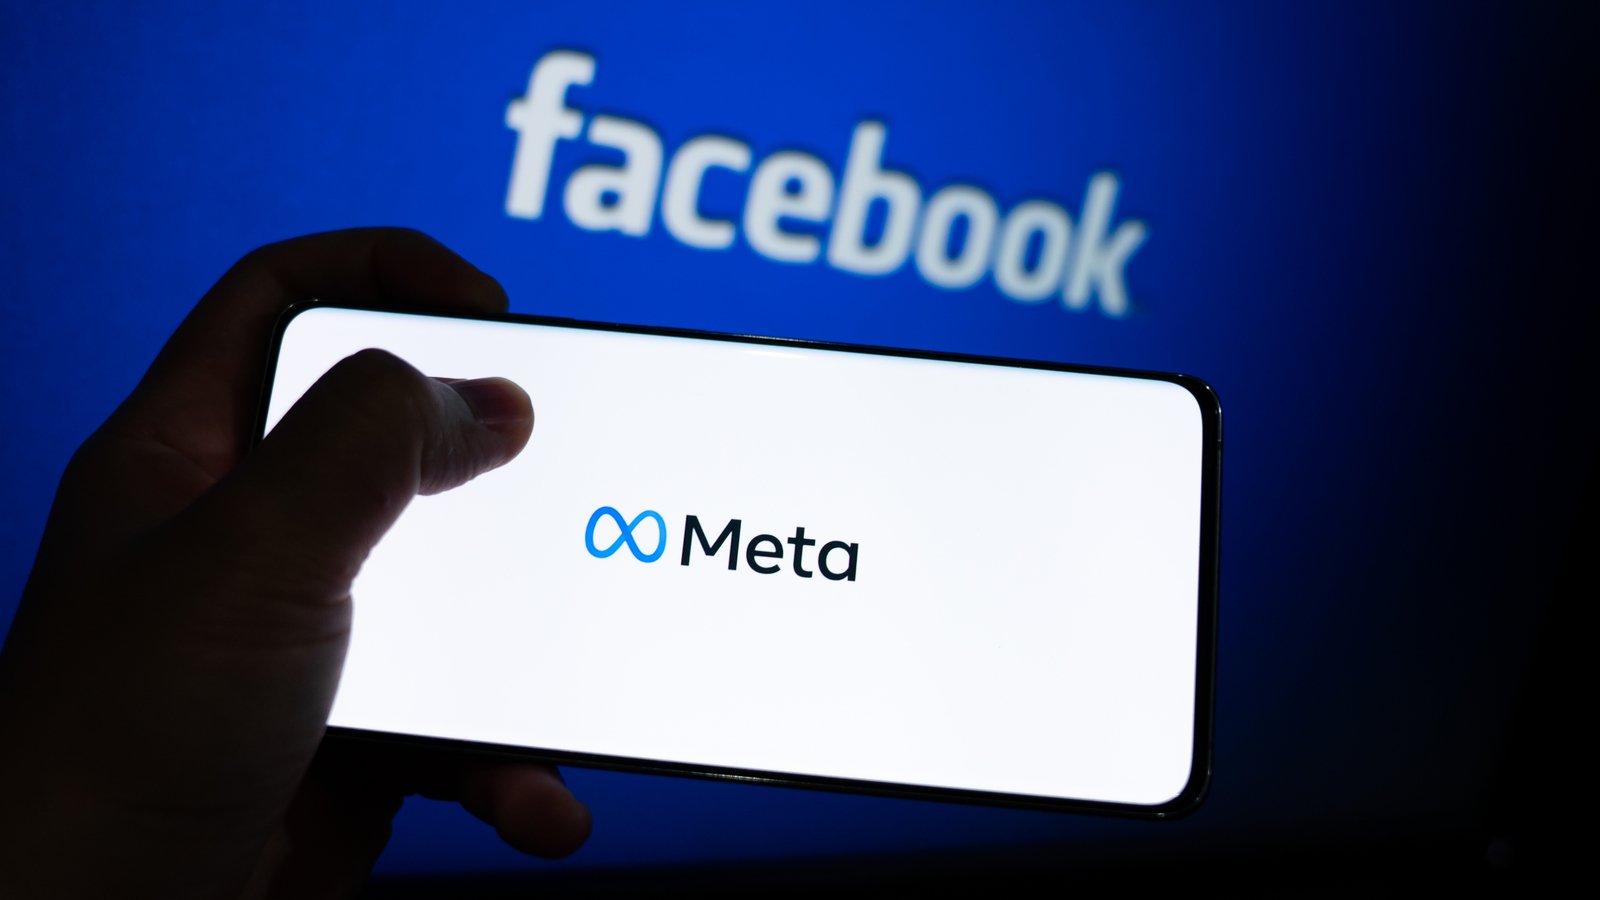 Meta logo is shown on a device screen. Meta is the new corporate name of Facebook.